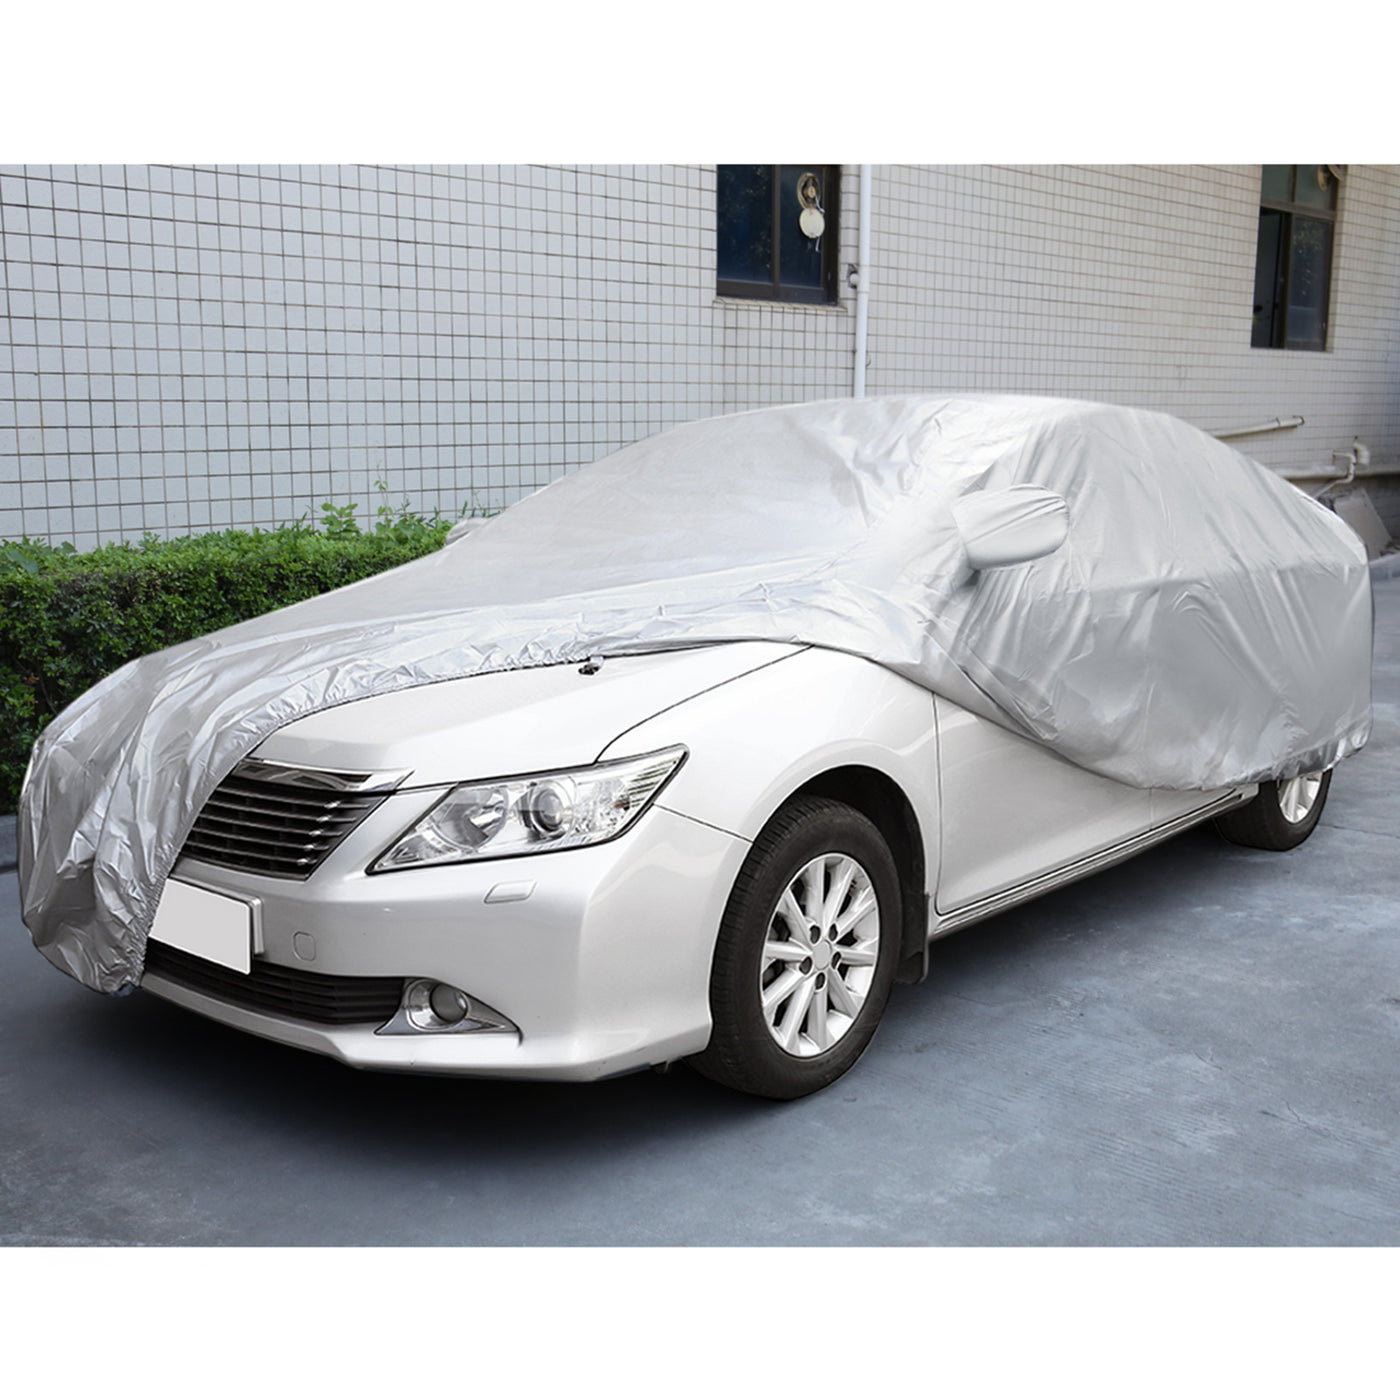 uxcell Uxcell Universal Sedan Car Cover Waterproof Outdoor Sun Rain Resistant Protection M 4.9M x 1.8M x 1.5M